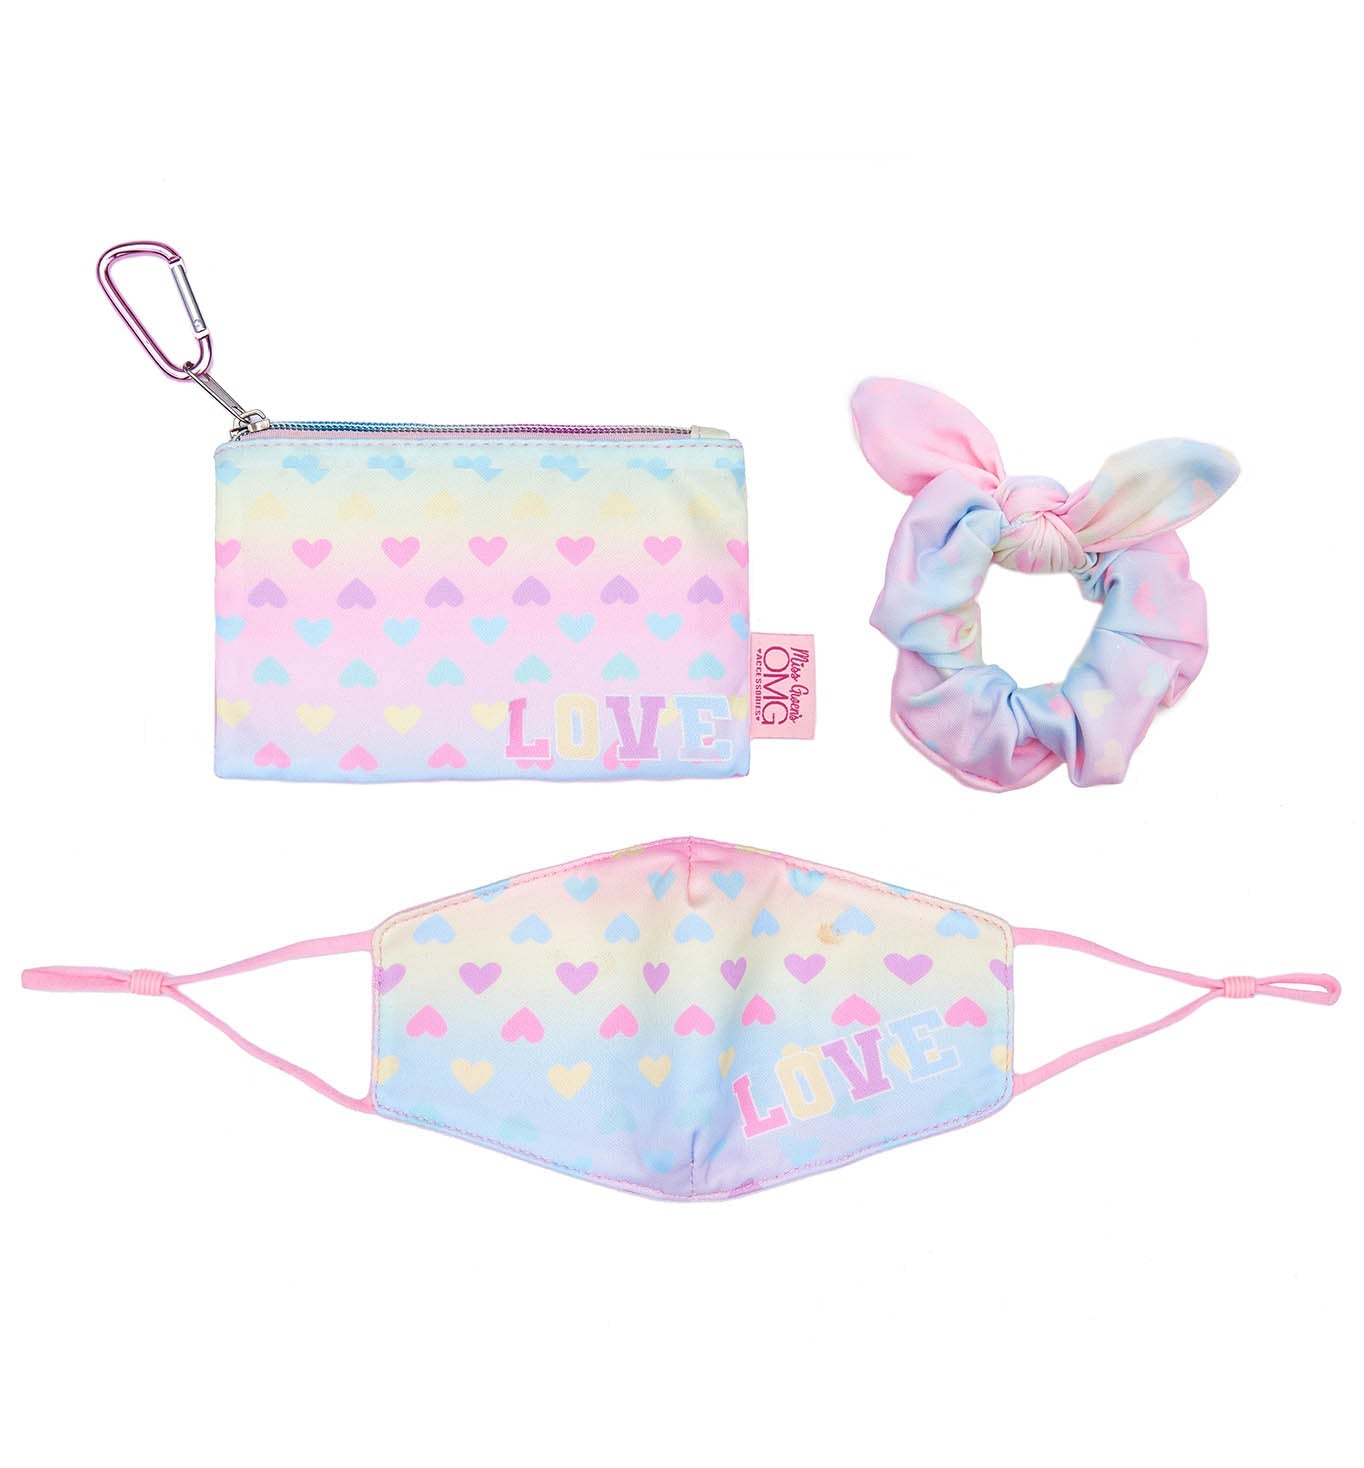 Love Ombre Heart Print Face Mask, Pouch and Scrunchies Set